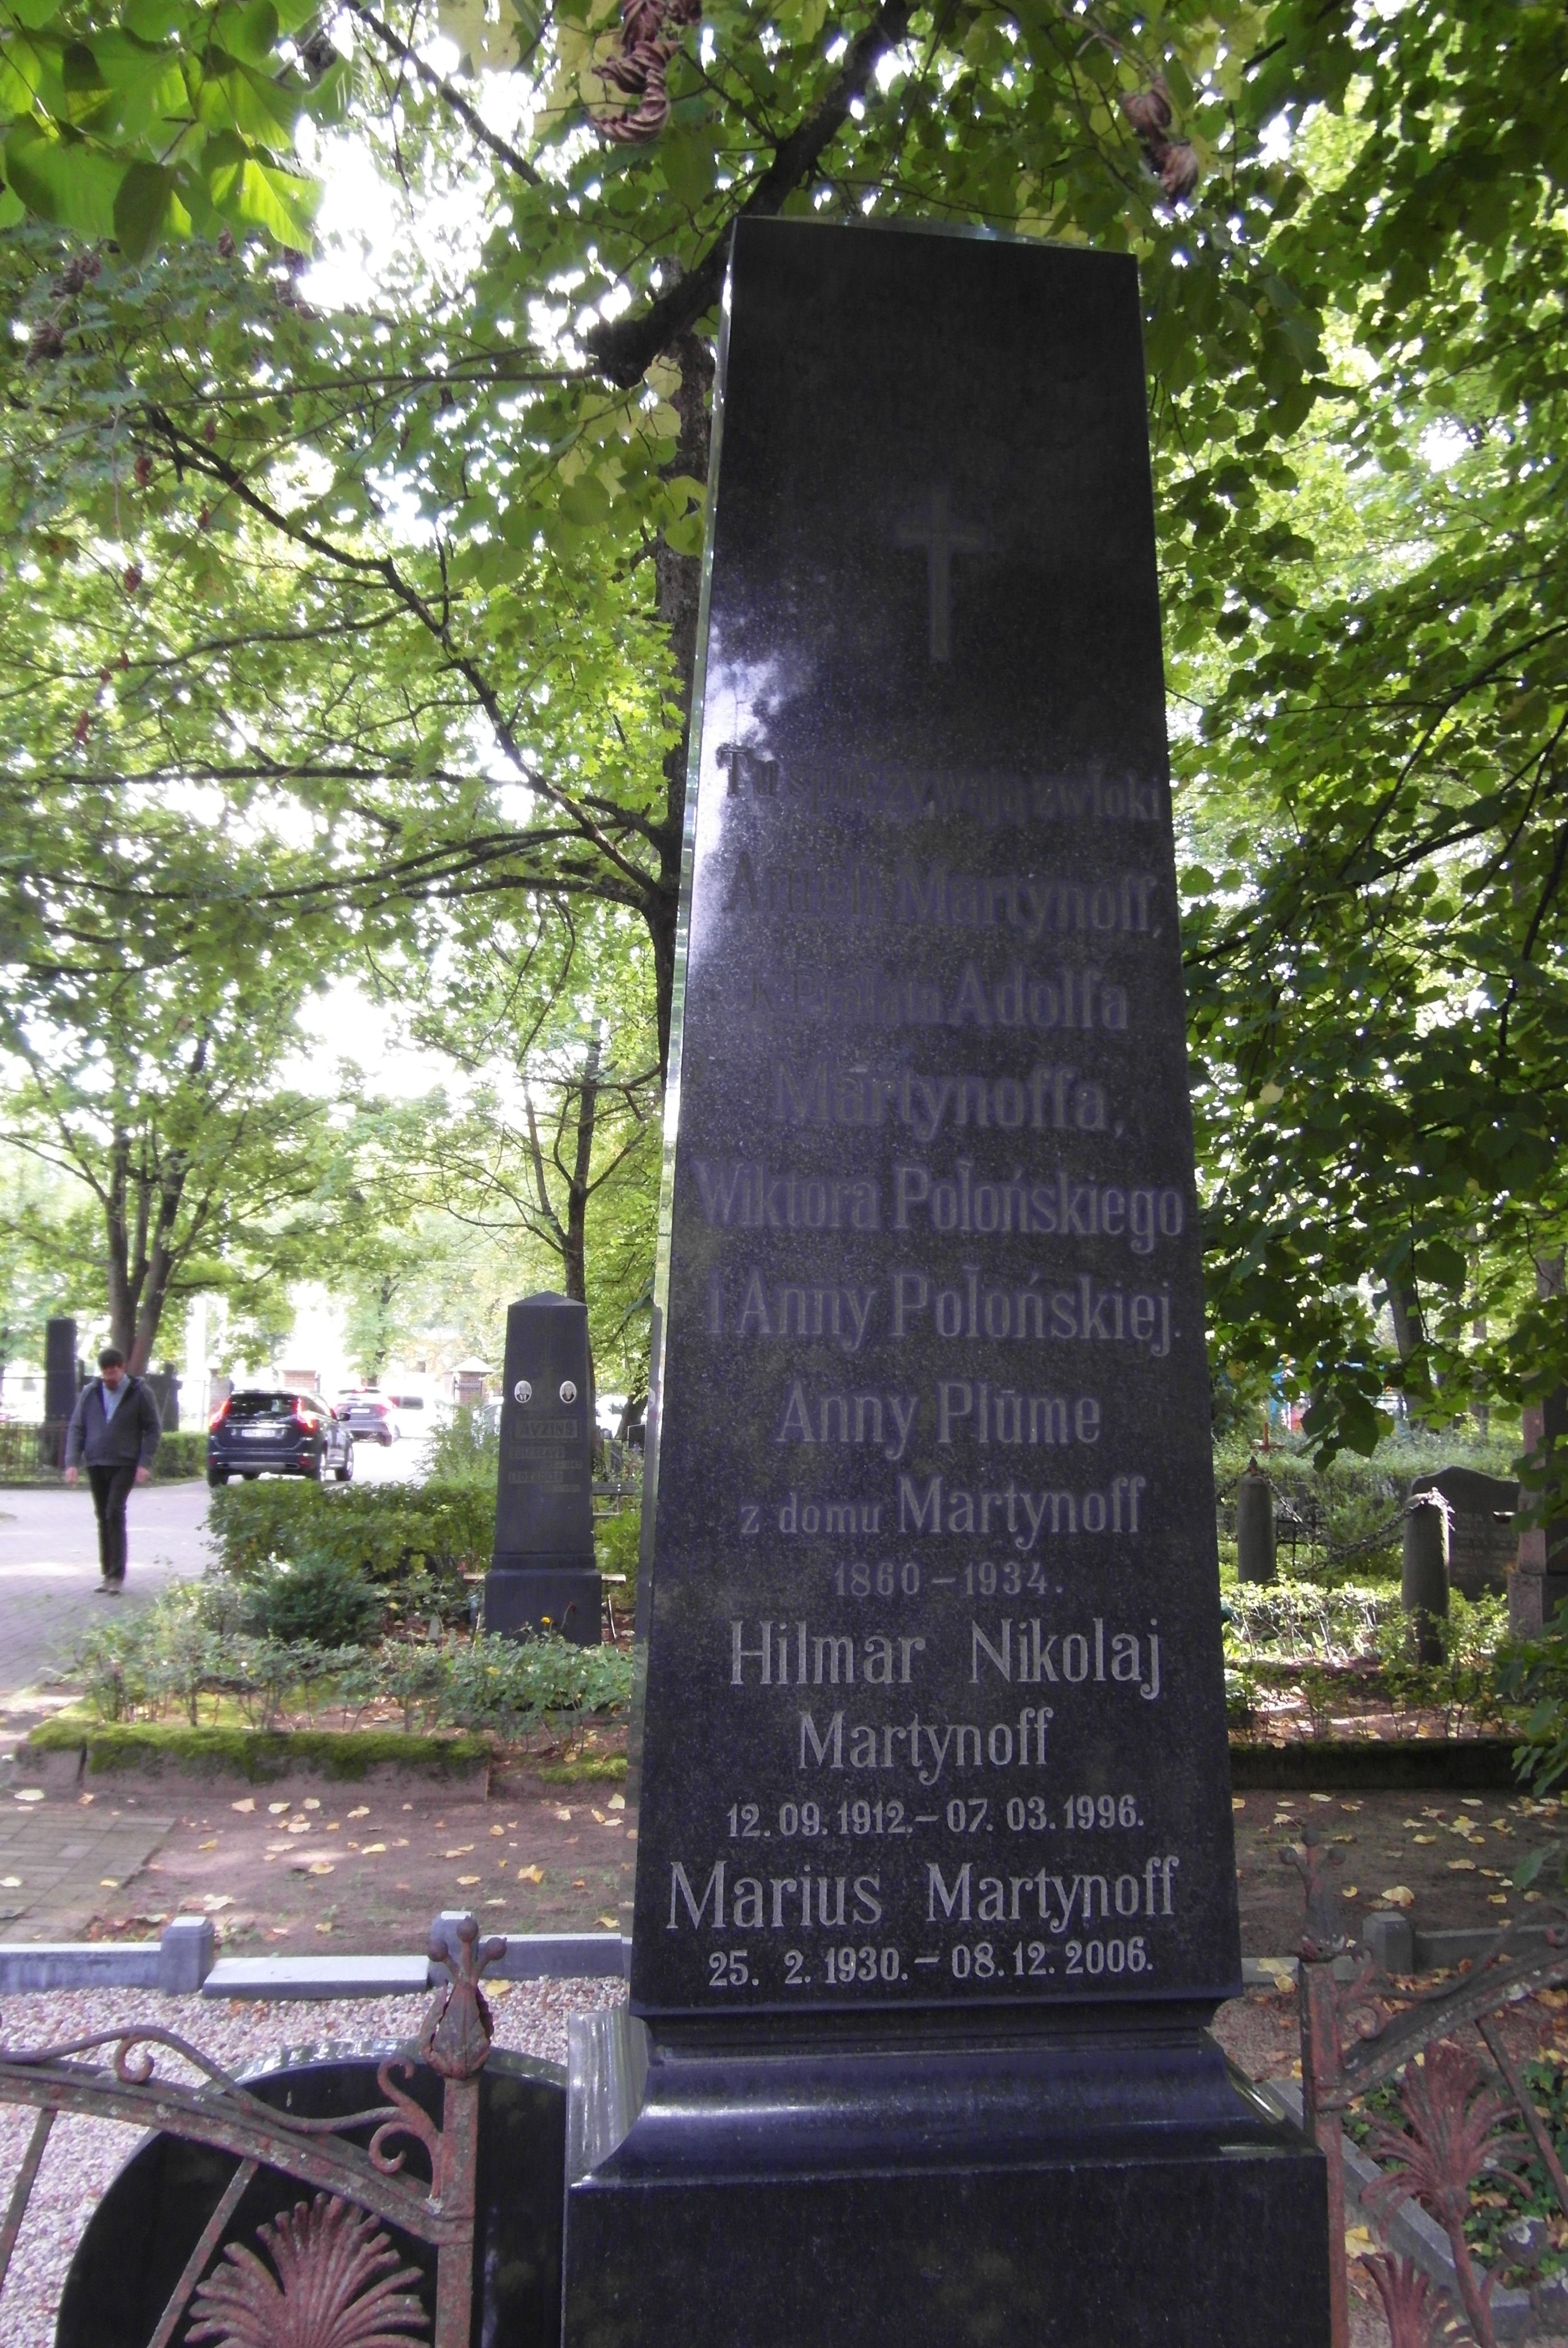 Inscription from the tombstone of the Martynoff family, St Michael's cemetery in Riga, as of 2021.